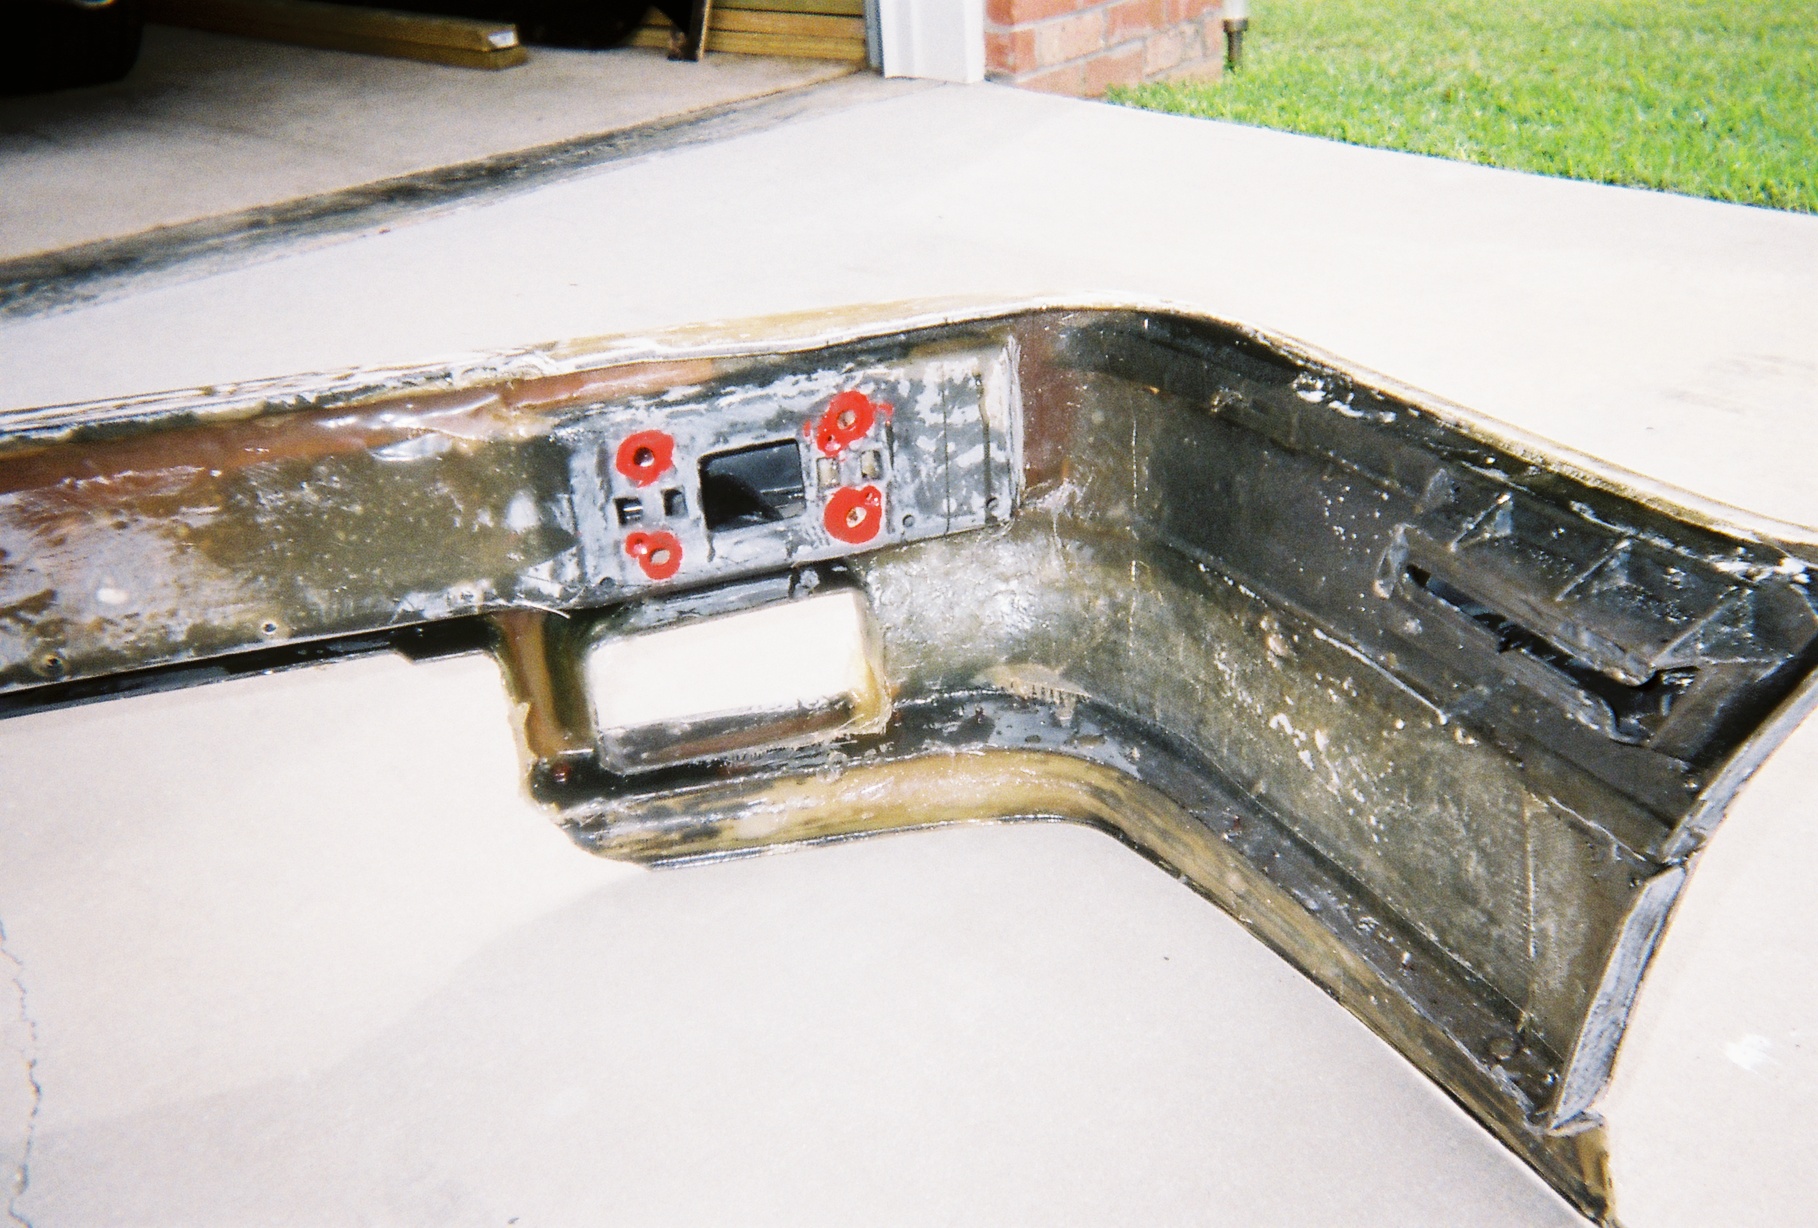 1989 Ford escort bumpers #1